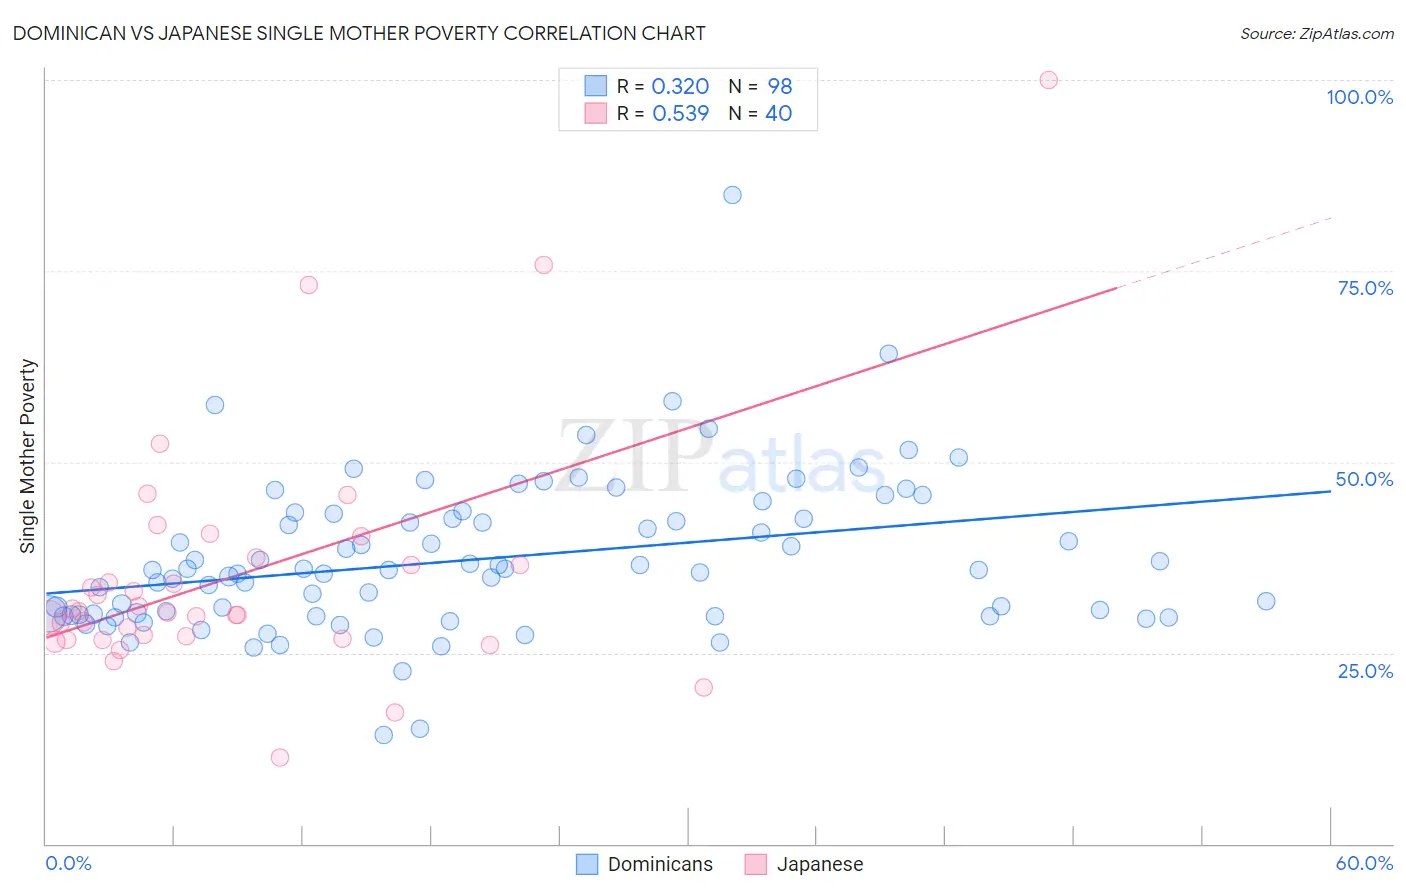 Dominican vs Japanese Single Mother Poverty